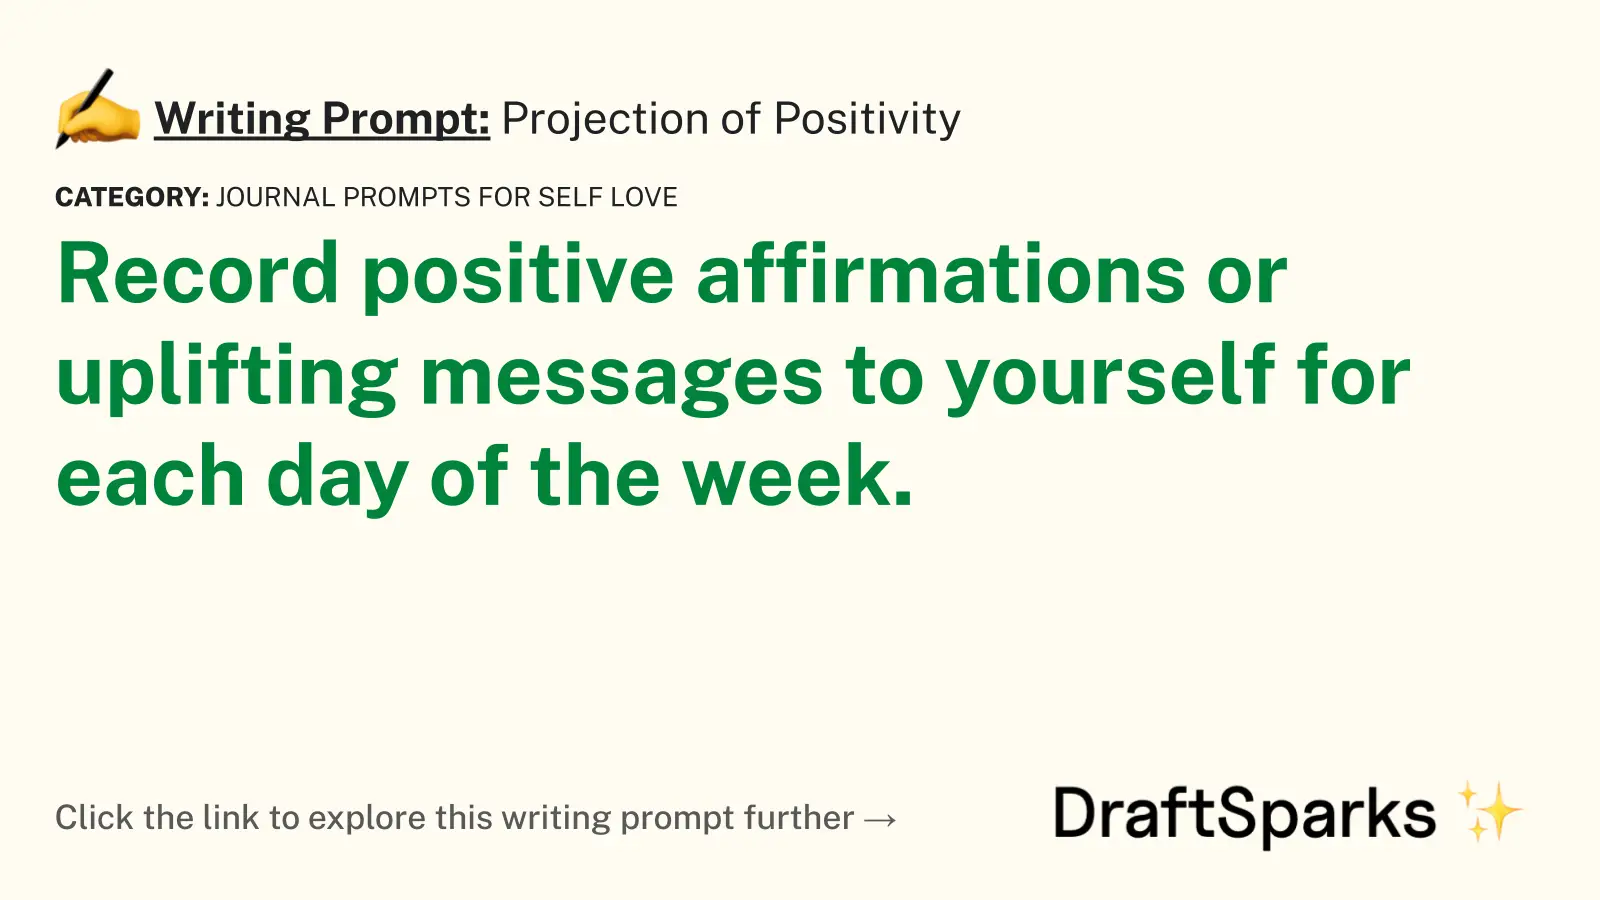 Projection of Positivity